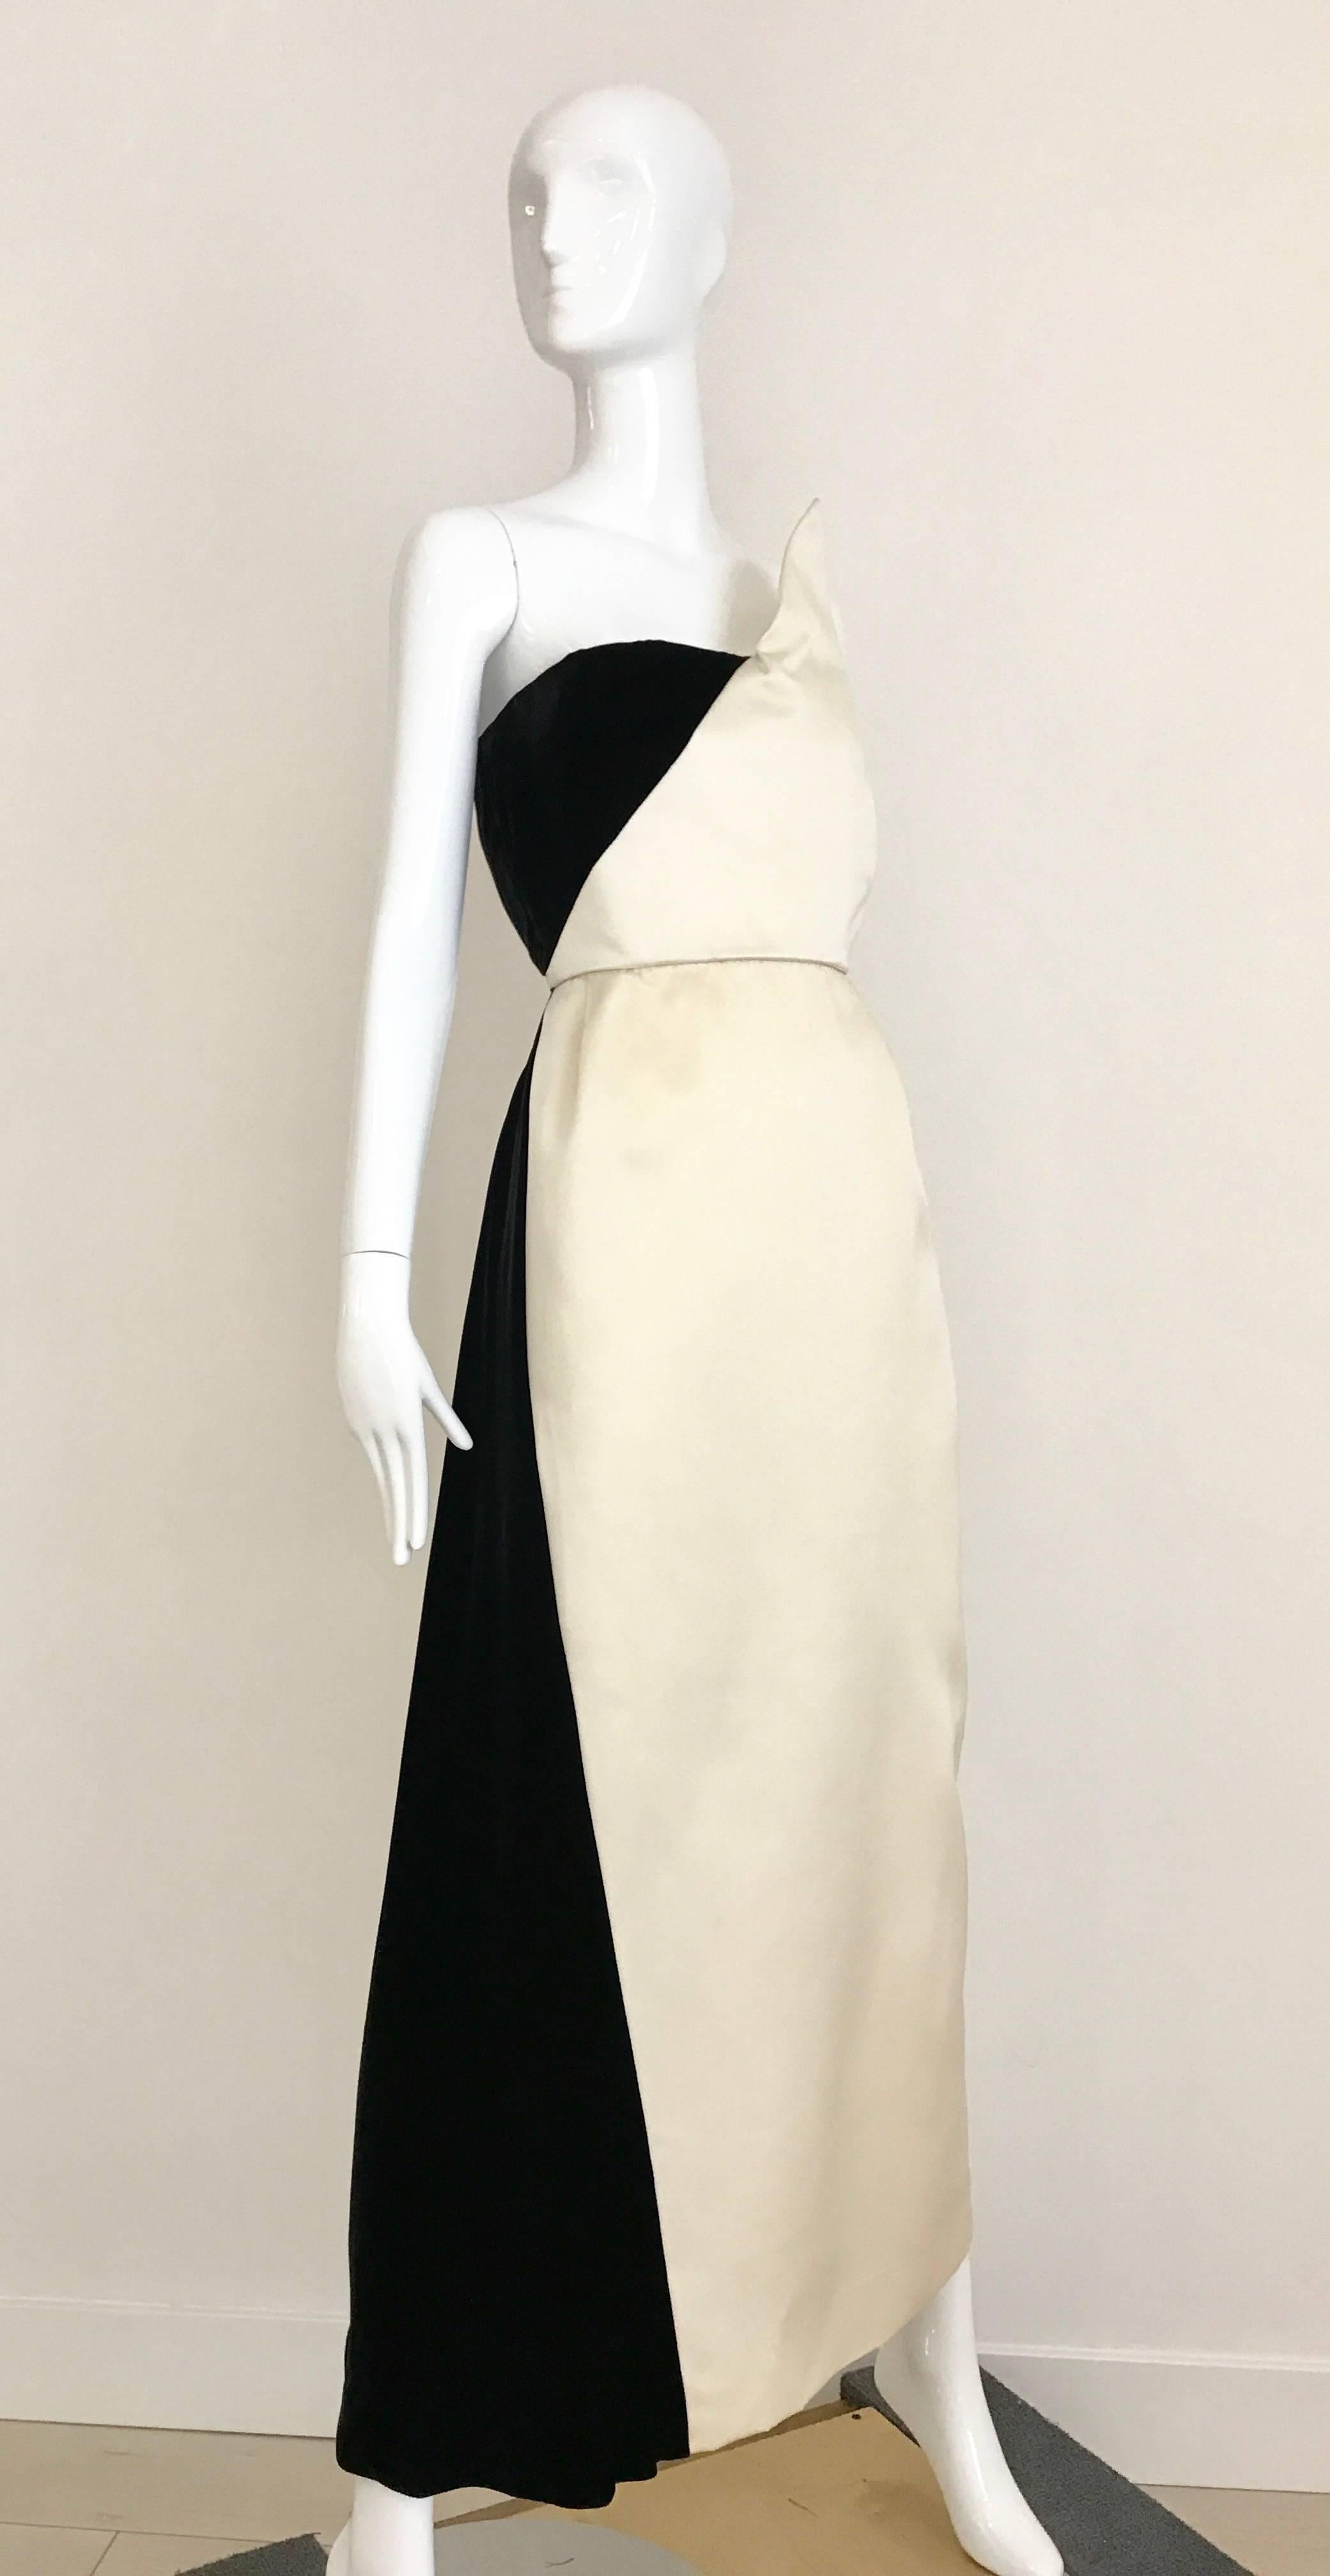 1990s BILL BLASS Ivory and Black Silk Strapless Origami Gown. Perfect for black tie event. 
Bust: 35 inch   / Waist:  26.5 inch  / Hip: 38 inch/  Dress Length: 47 inch + 2 inch fold.
SMALL - MEDIUM
**** This Garment has been professionally Dry